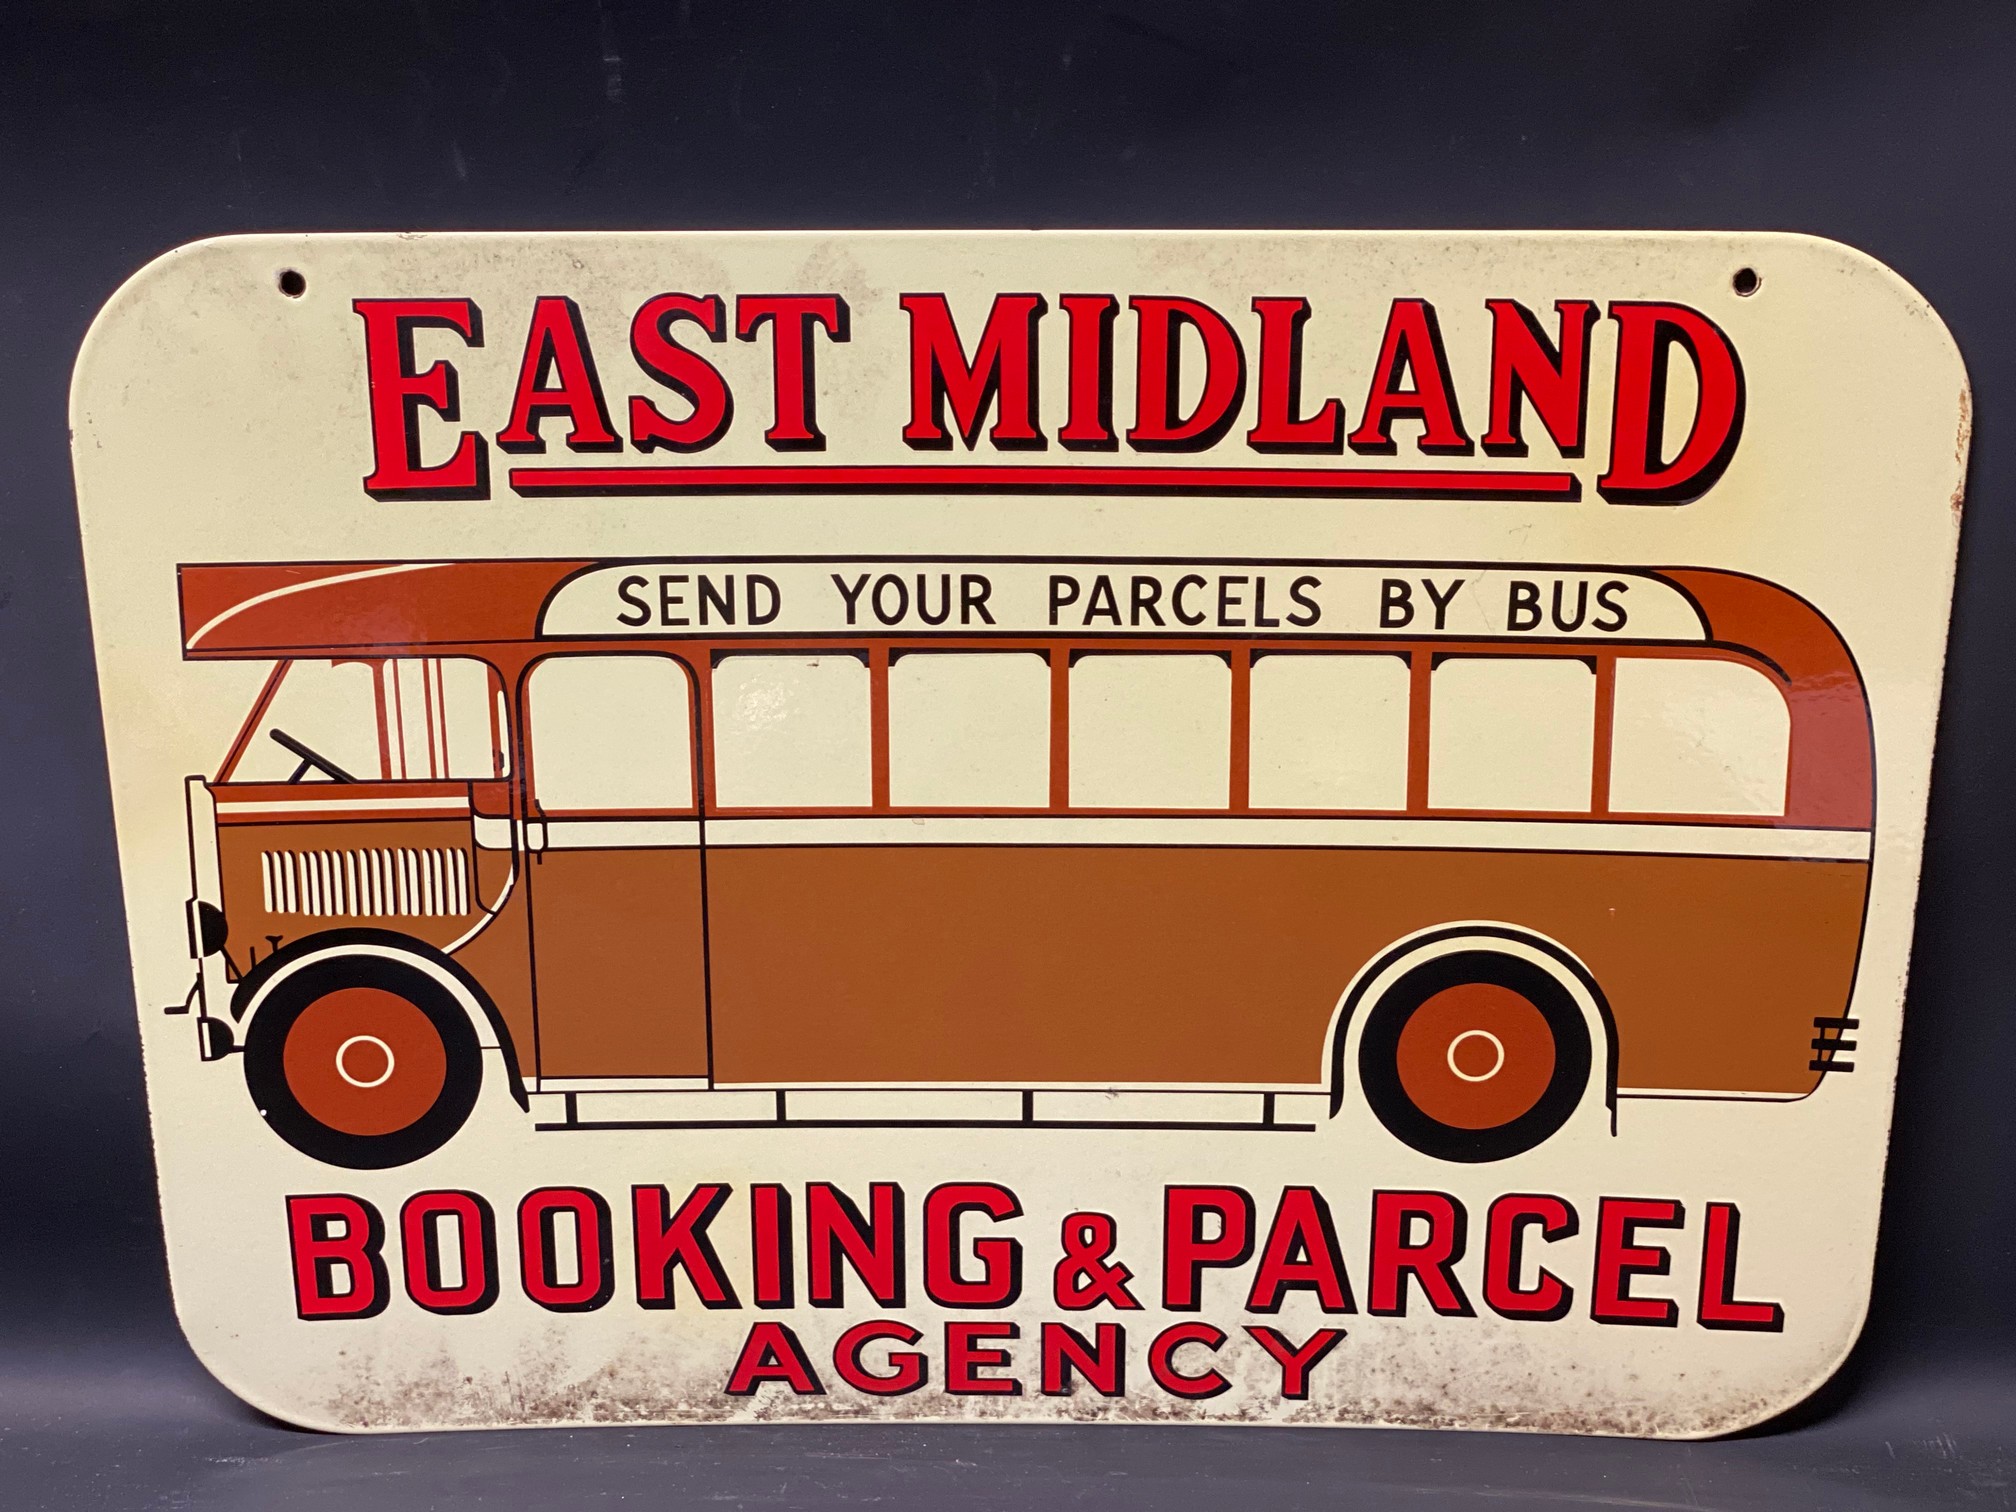 An East Midland Booking and Parcel Agency pictorial double sided enamel sign depicting a vintage bus